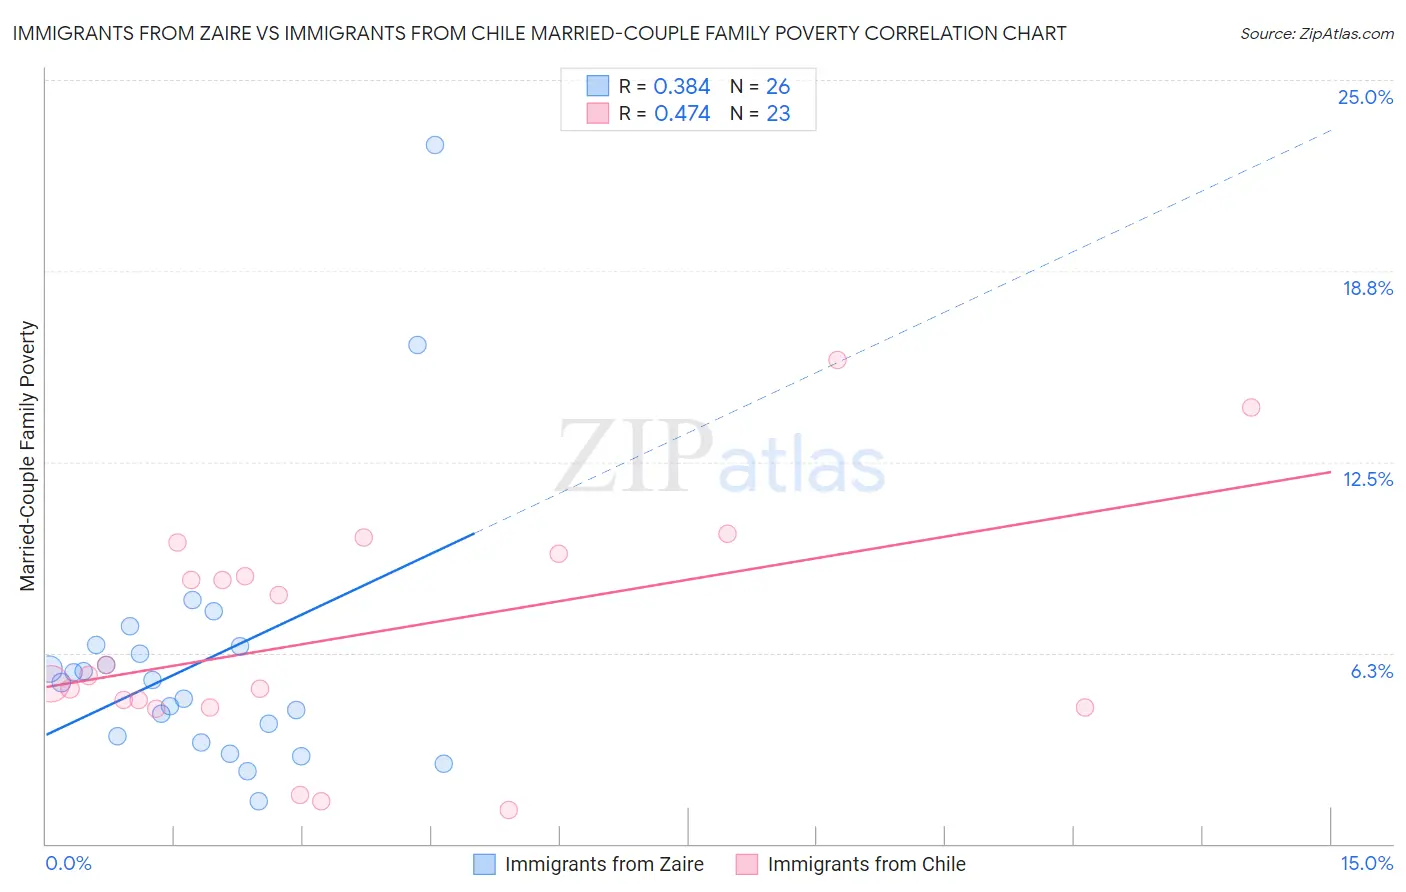 Immigrants from Zaire vs Immigrants from Chile Married-Couple Family Poverty